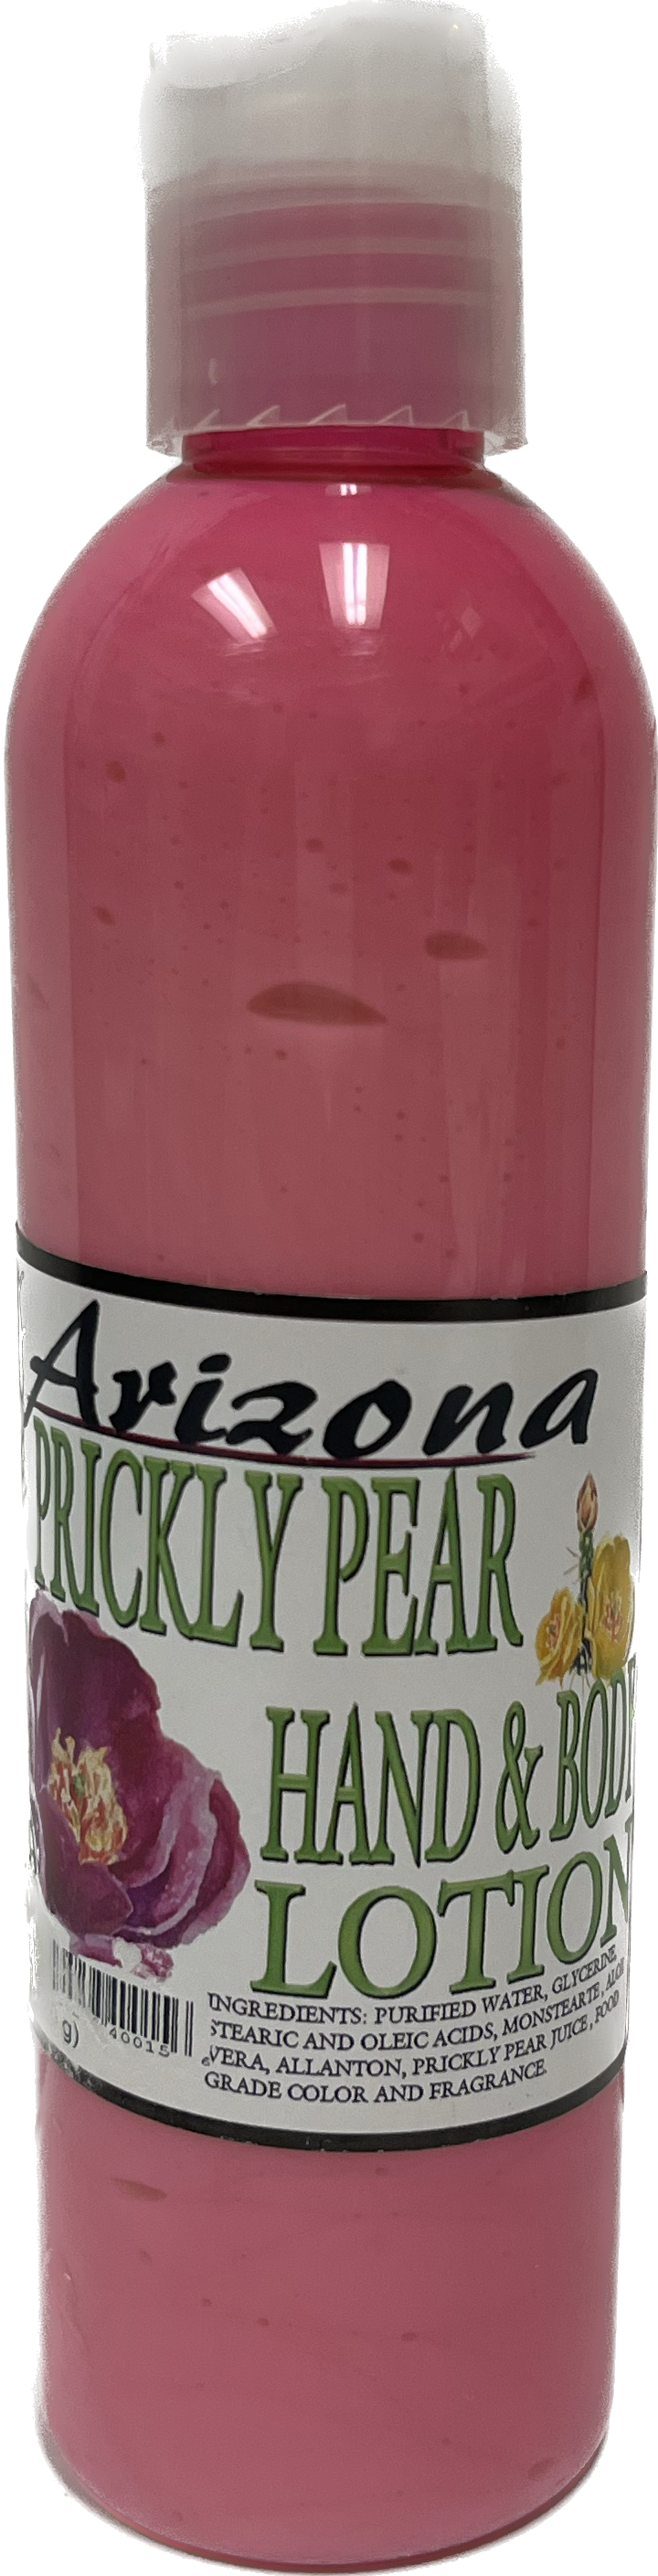 Prickly Pear Hand & Body Lotion